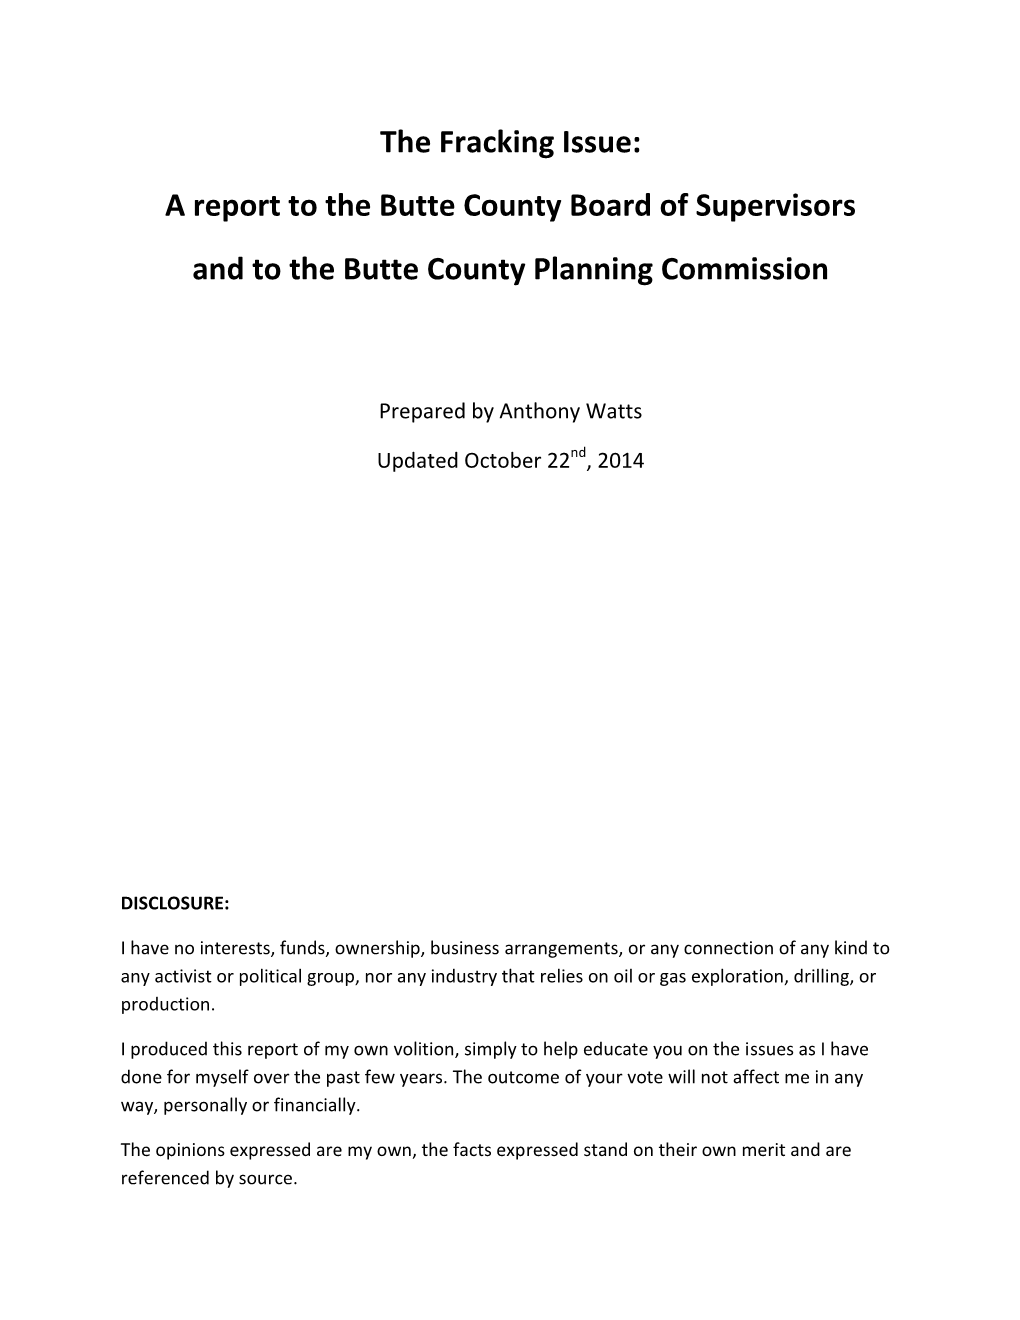 The Fracking Issue: a Report to the Butte County Board of Supervisors and to the Butte County Planning Commission